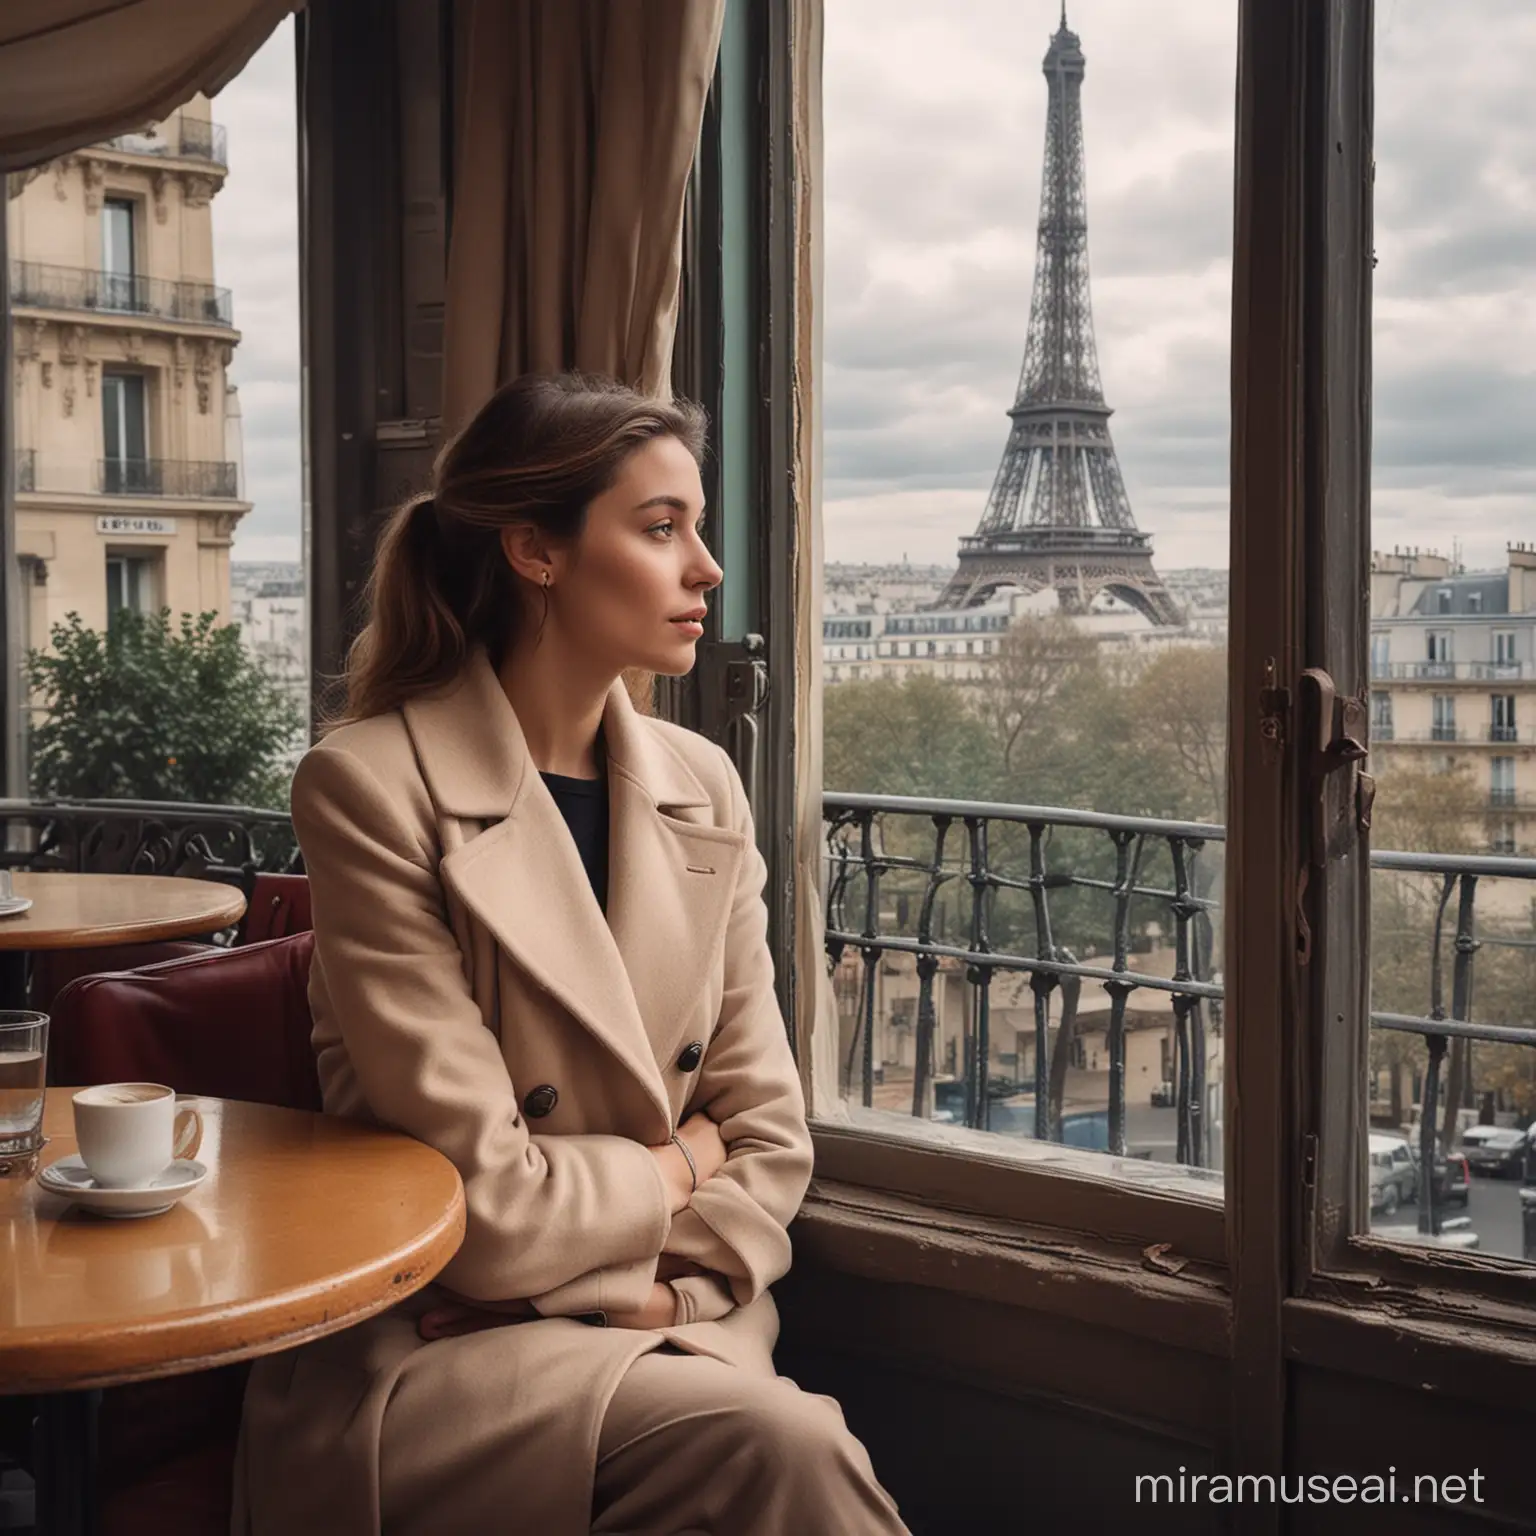 Mysterious Woman in Paris Caf with Eiffel Tower View